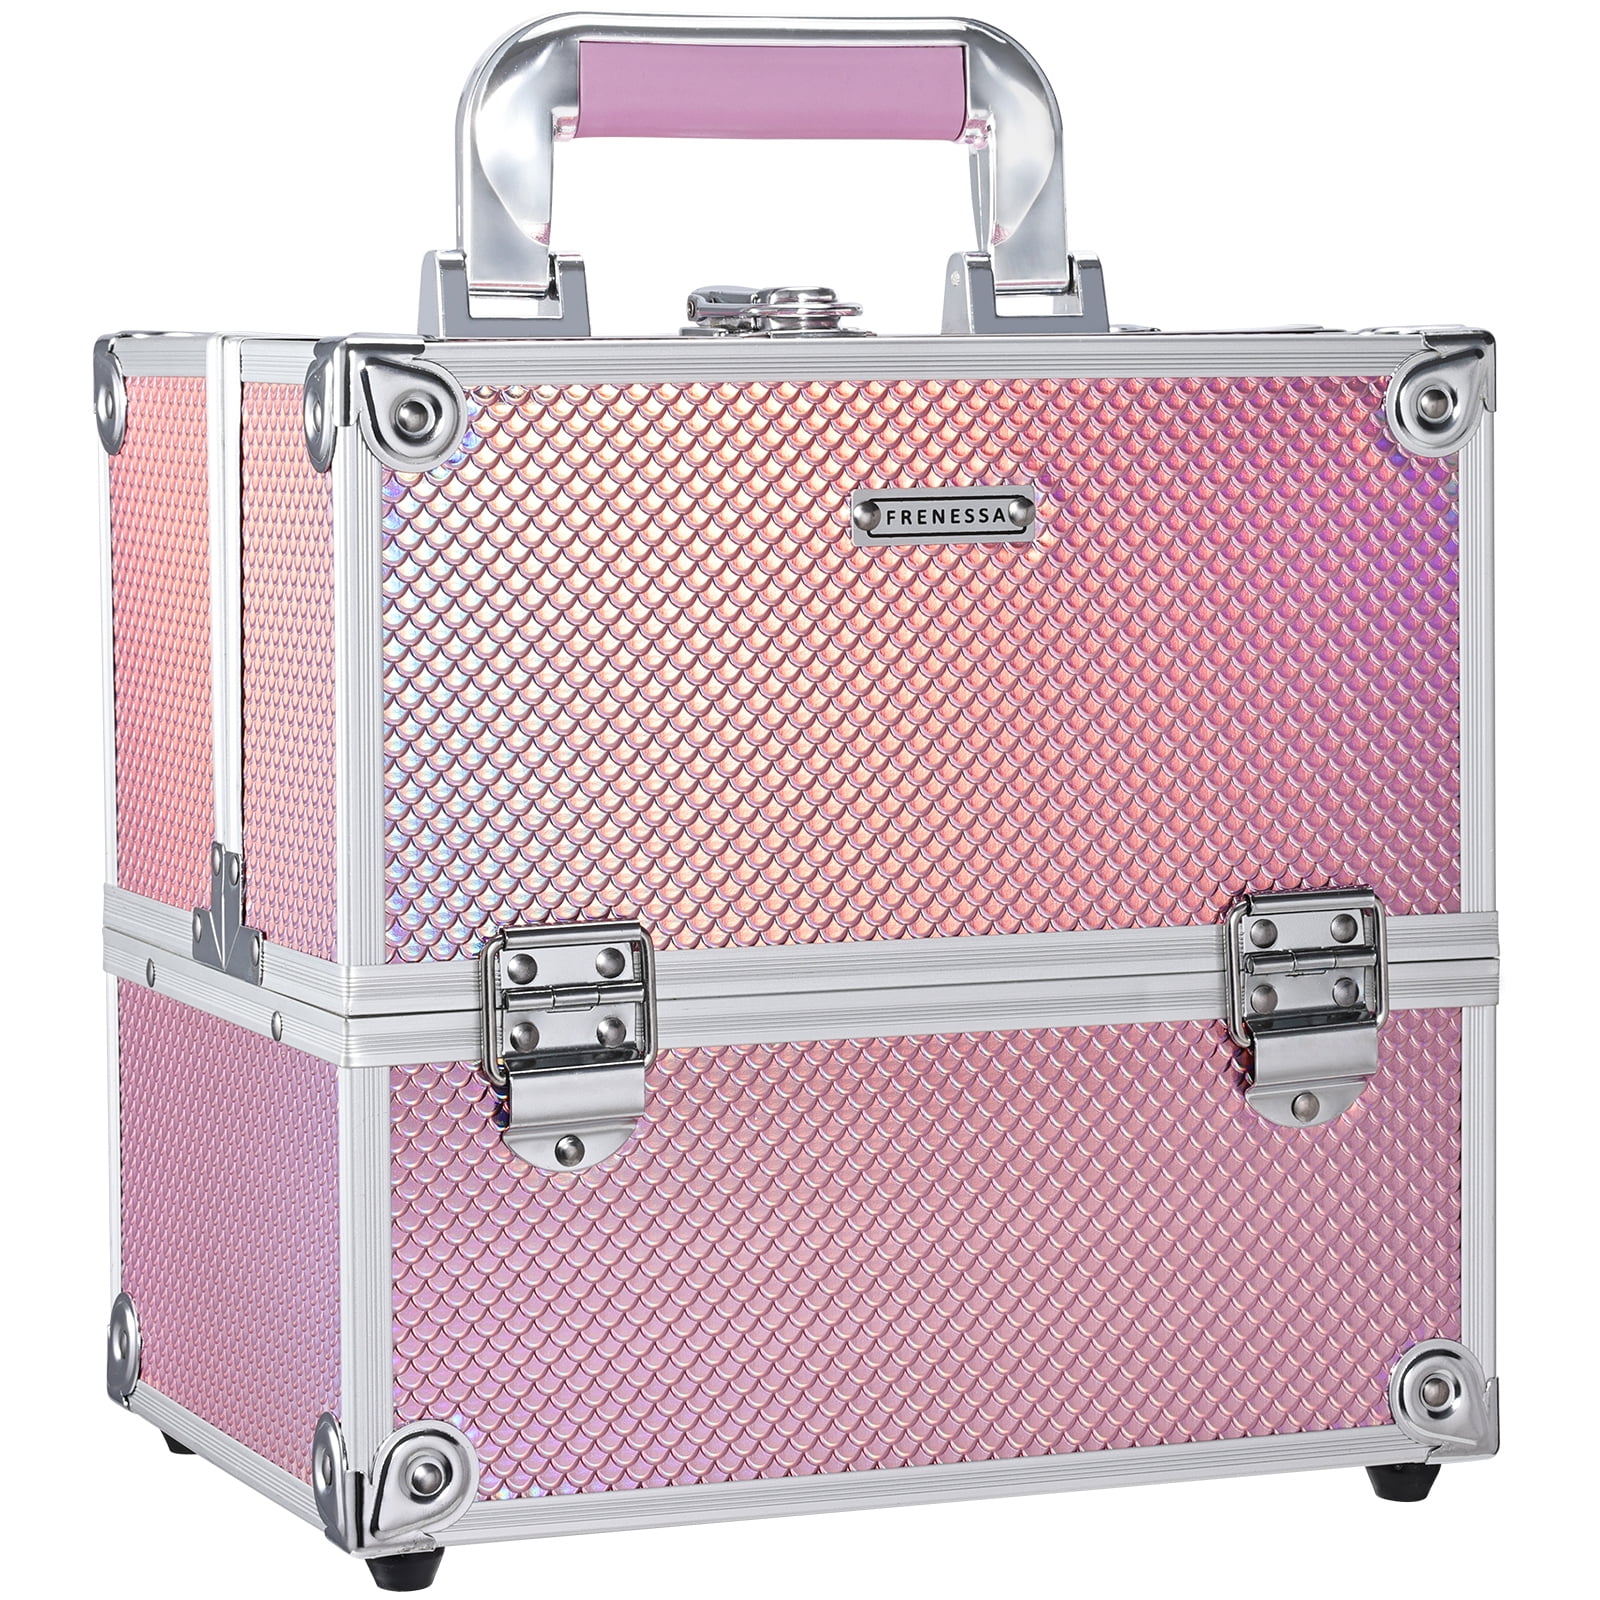 Makeup Storage, Pink Tackle box for Women with Handle. Cosmetic Storage Box  O